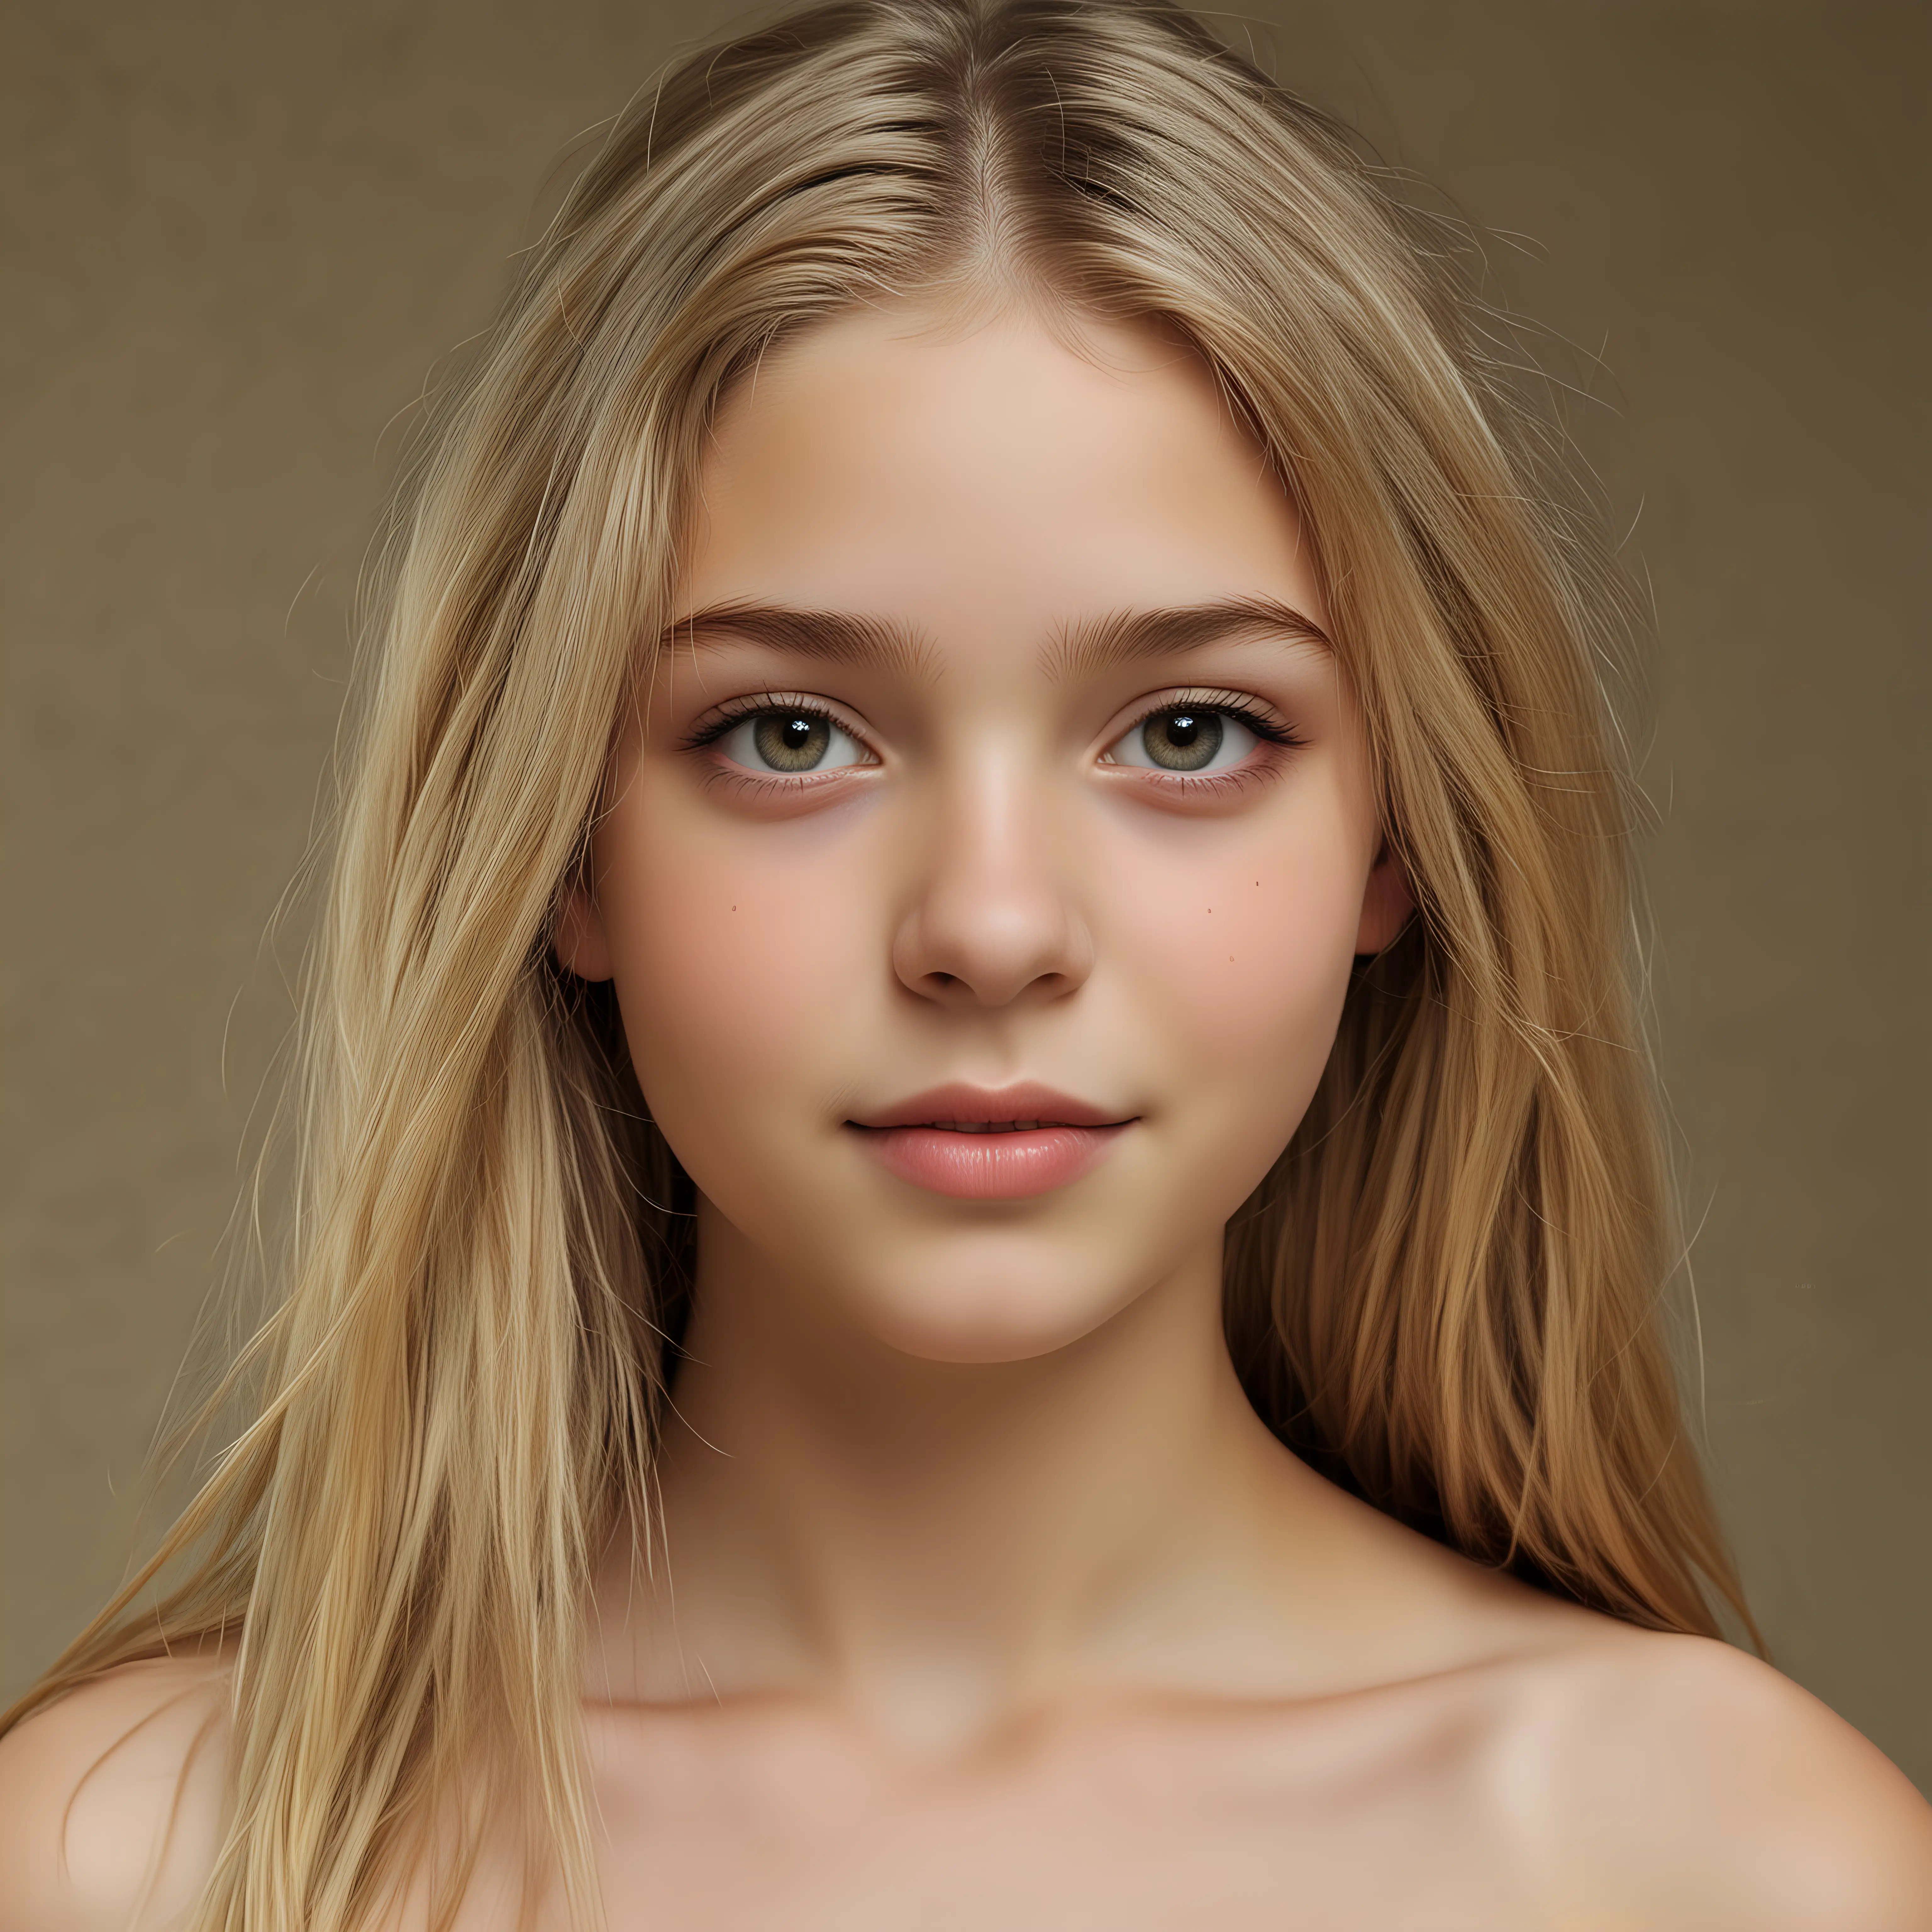 Ethereal Teen Model Maisie de Krassel with Loving Smile and Hazel Eyes